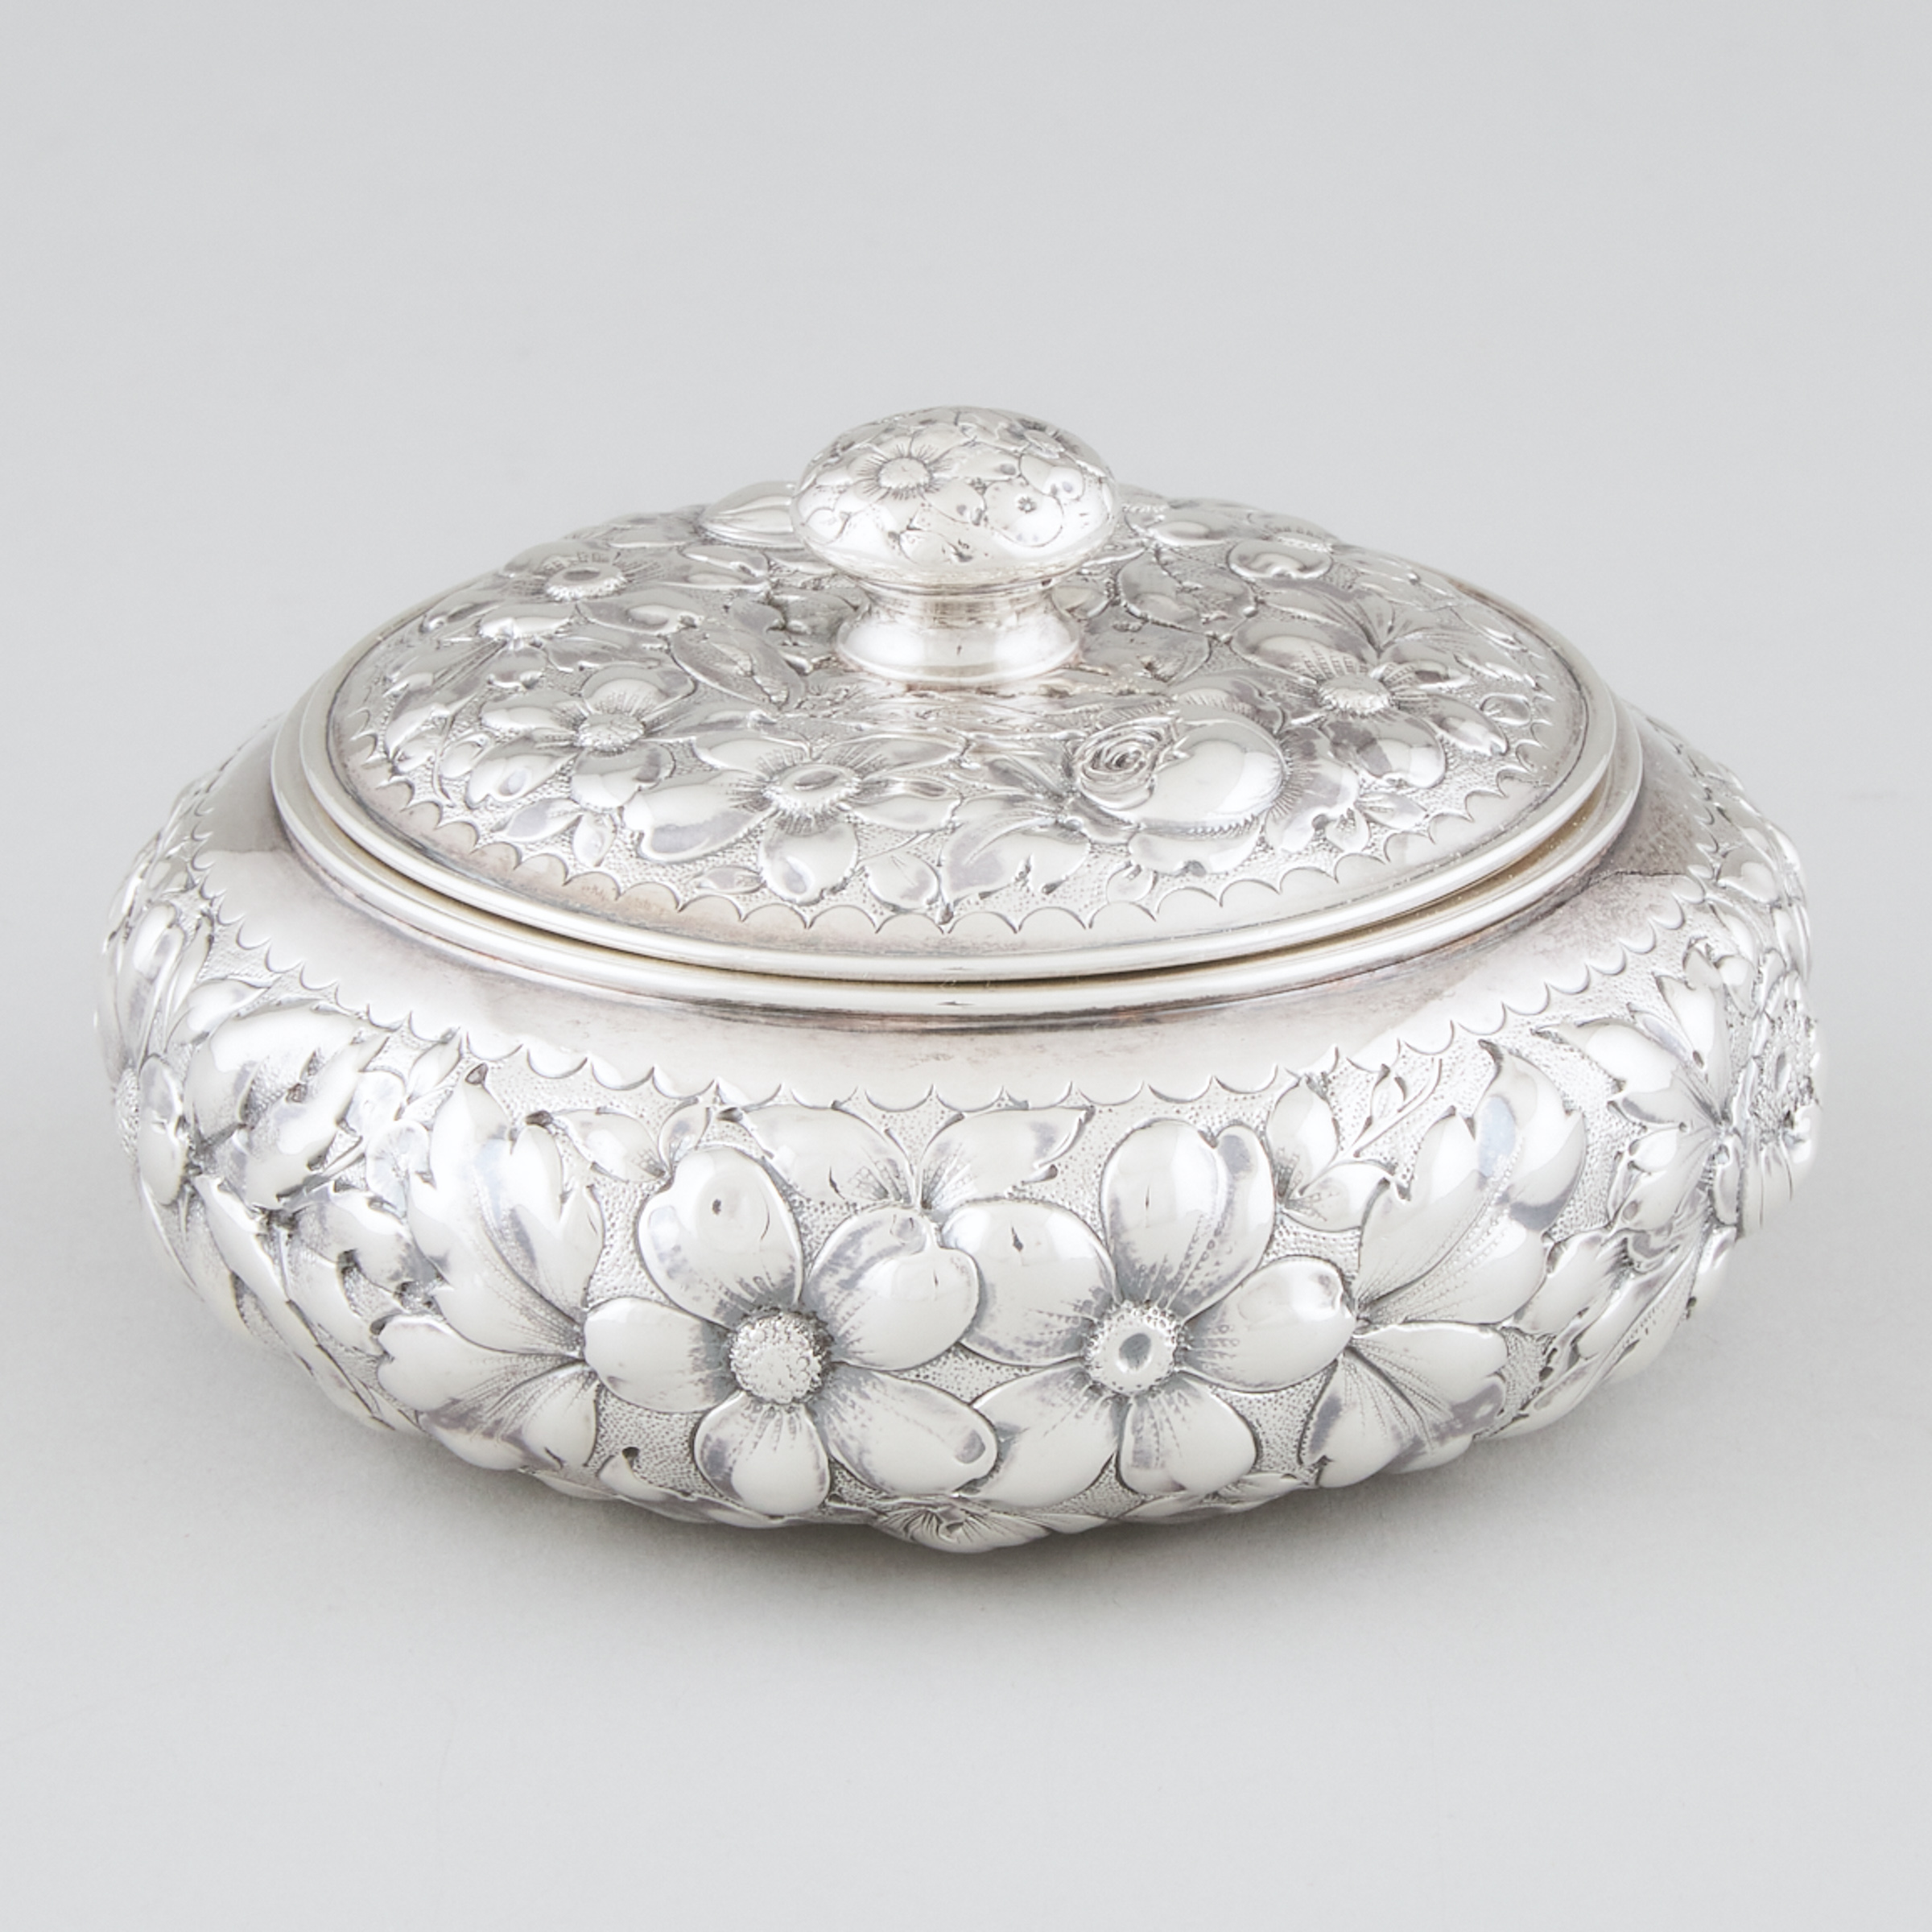 American Silver Repoussé Circular Covered Box, Gorham Mfg. Co., Providence, R.I., c.1891